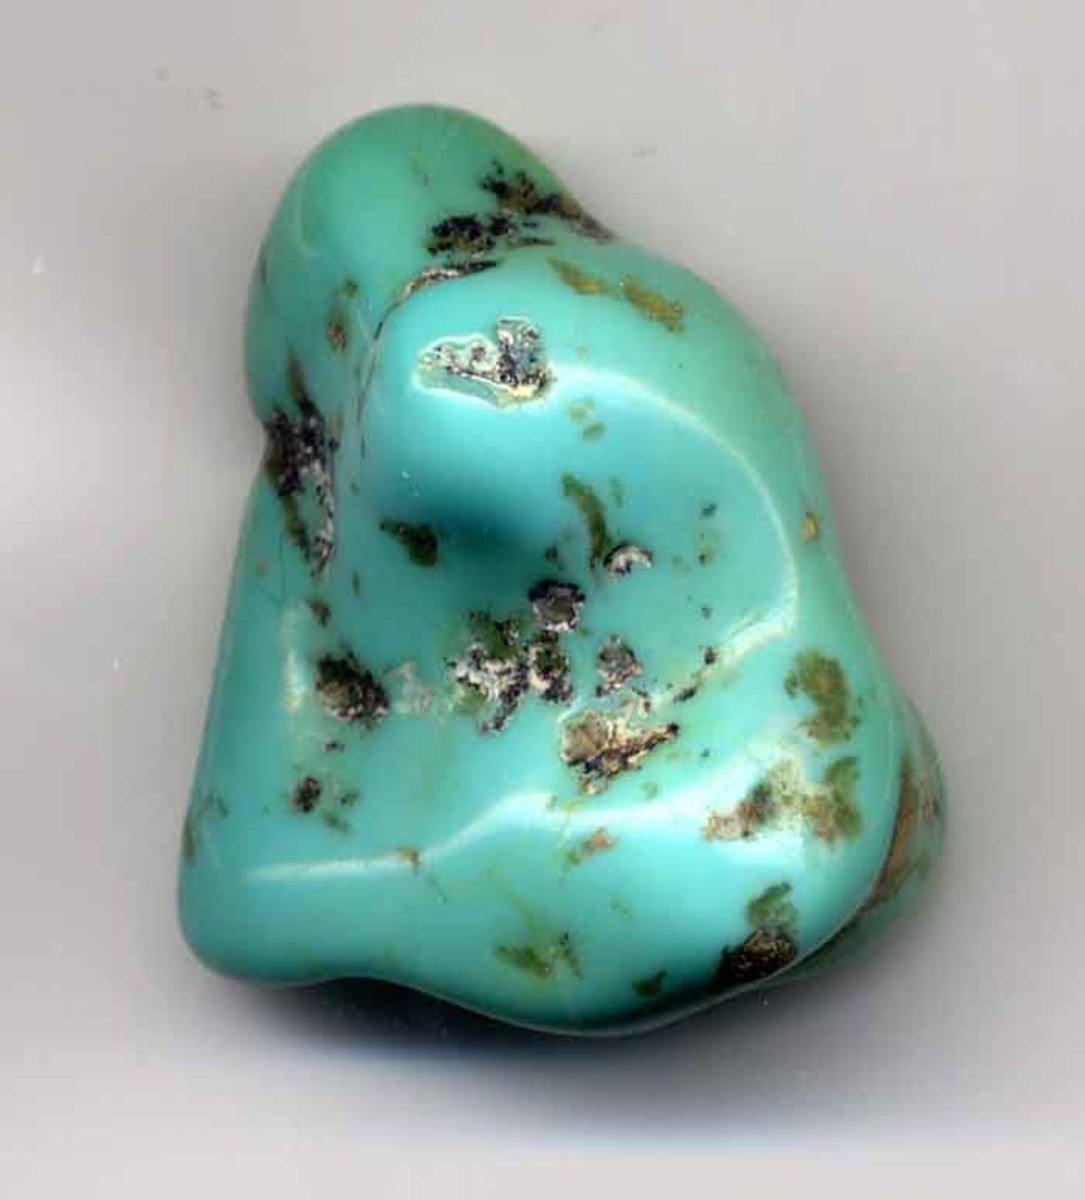 A green/blue turquoise pebble.